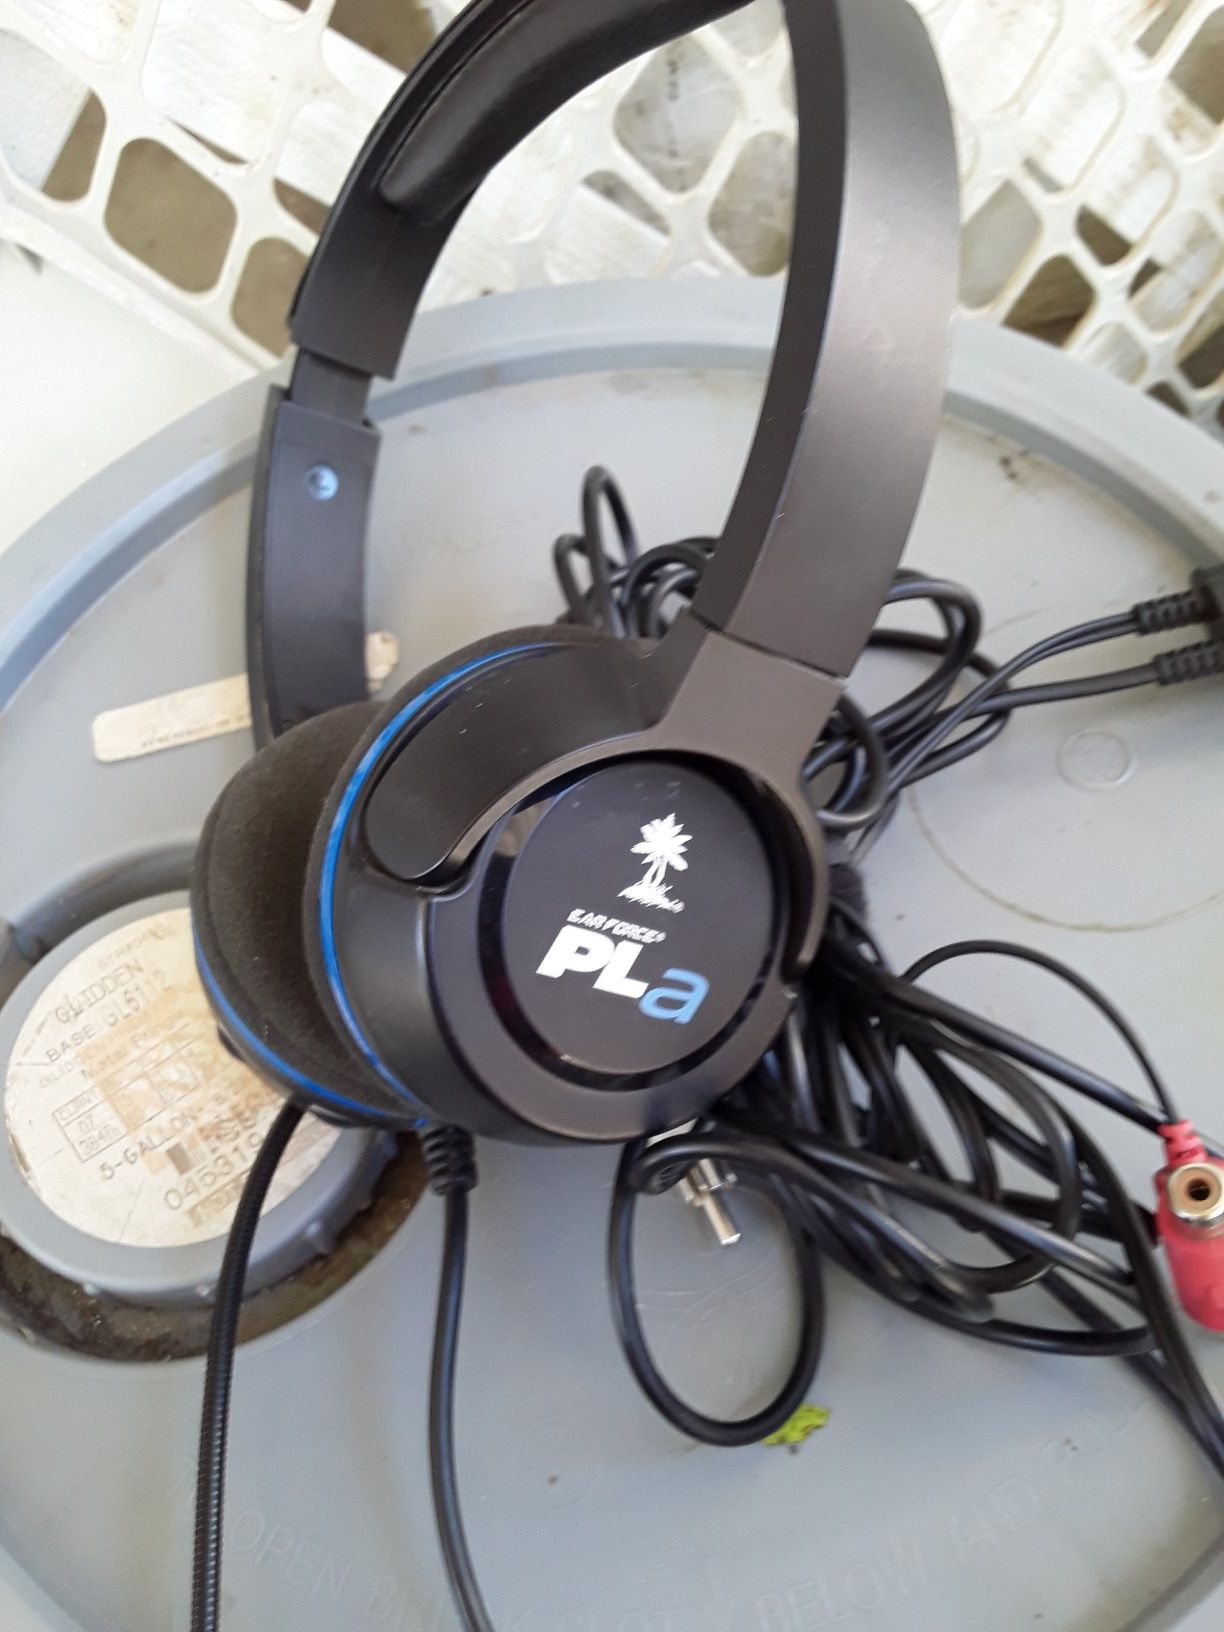 Turtle beach headset for pl4